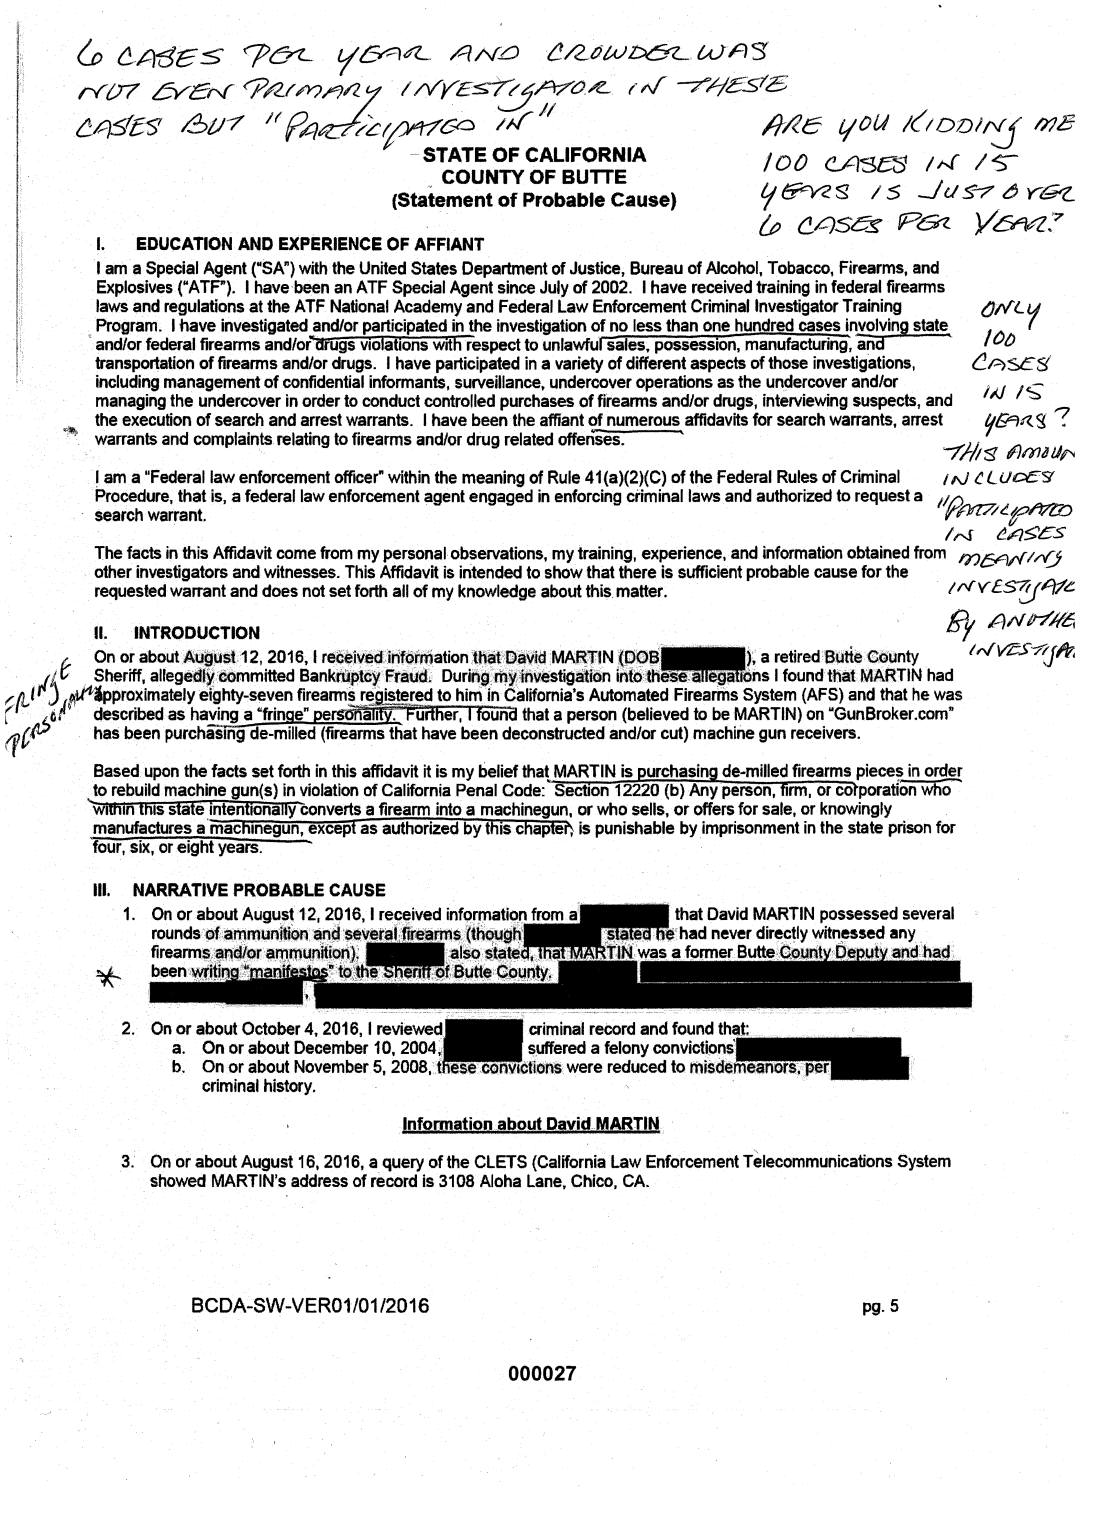 Statement of probable cause page 1